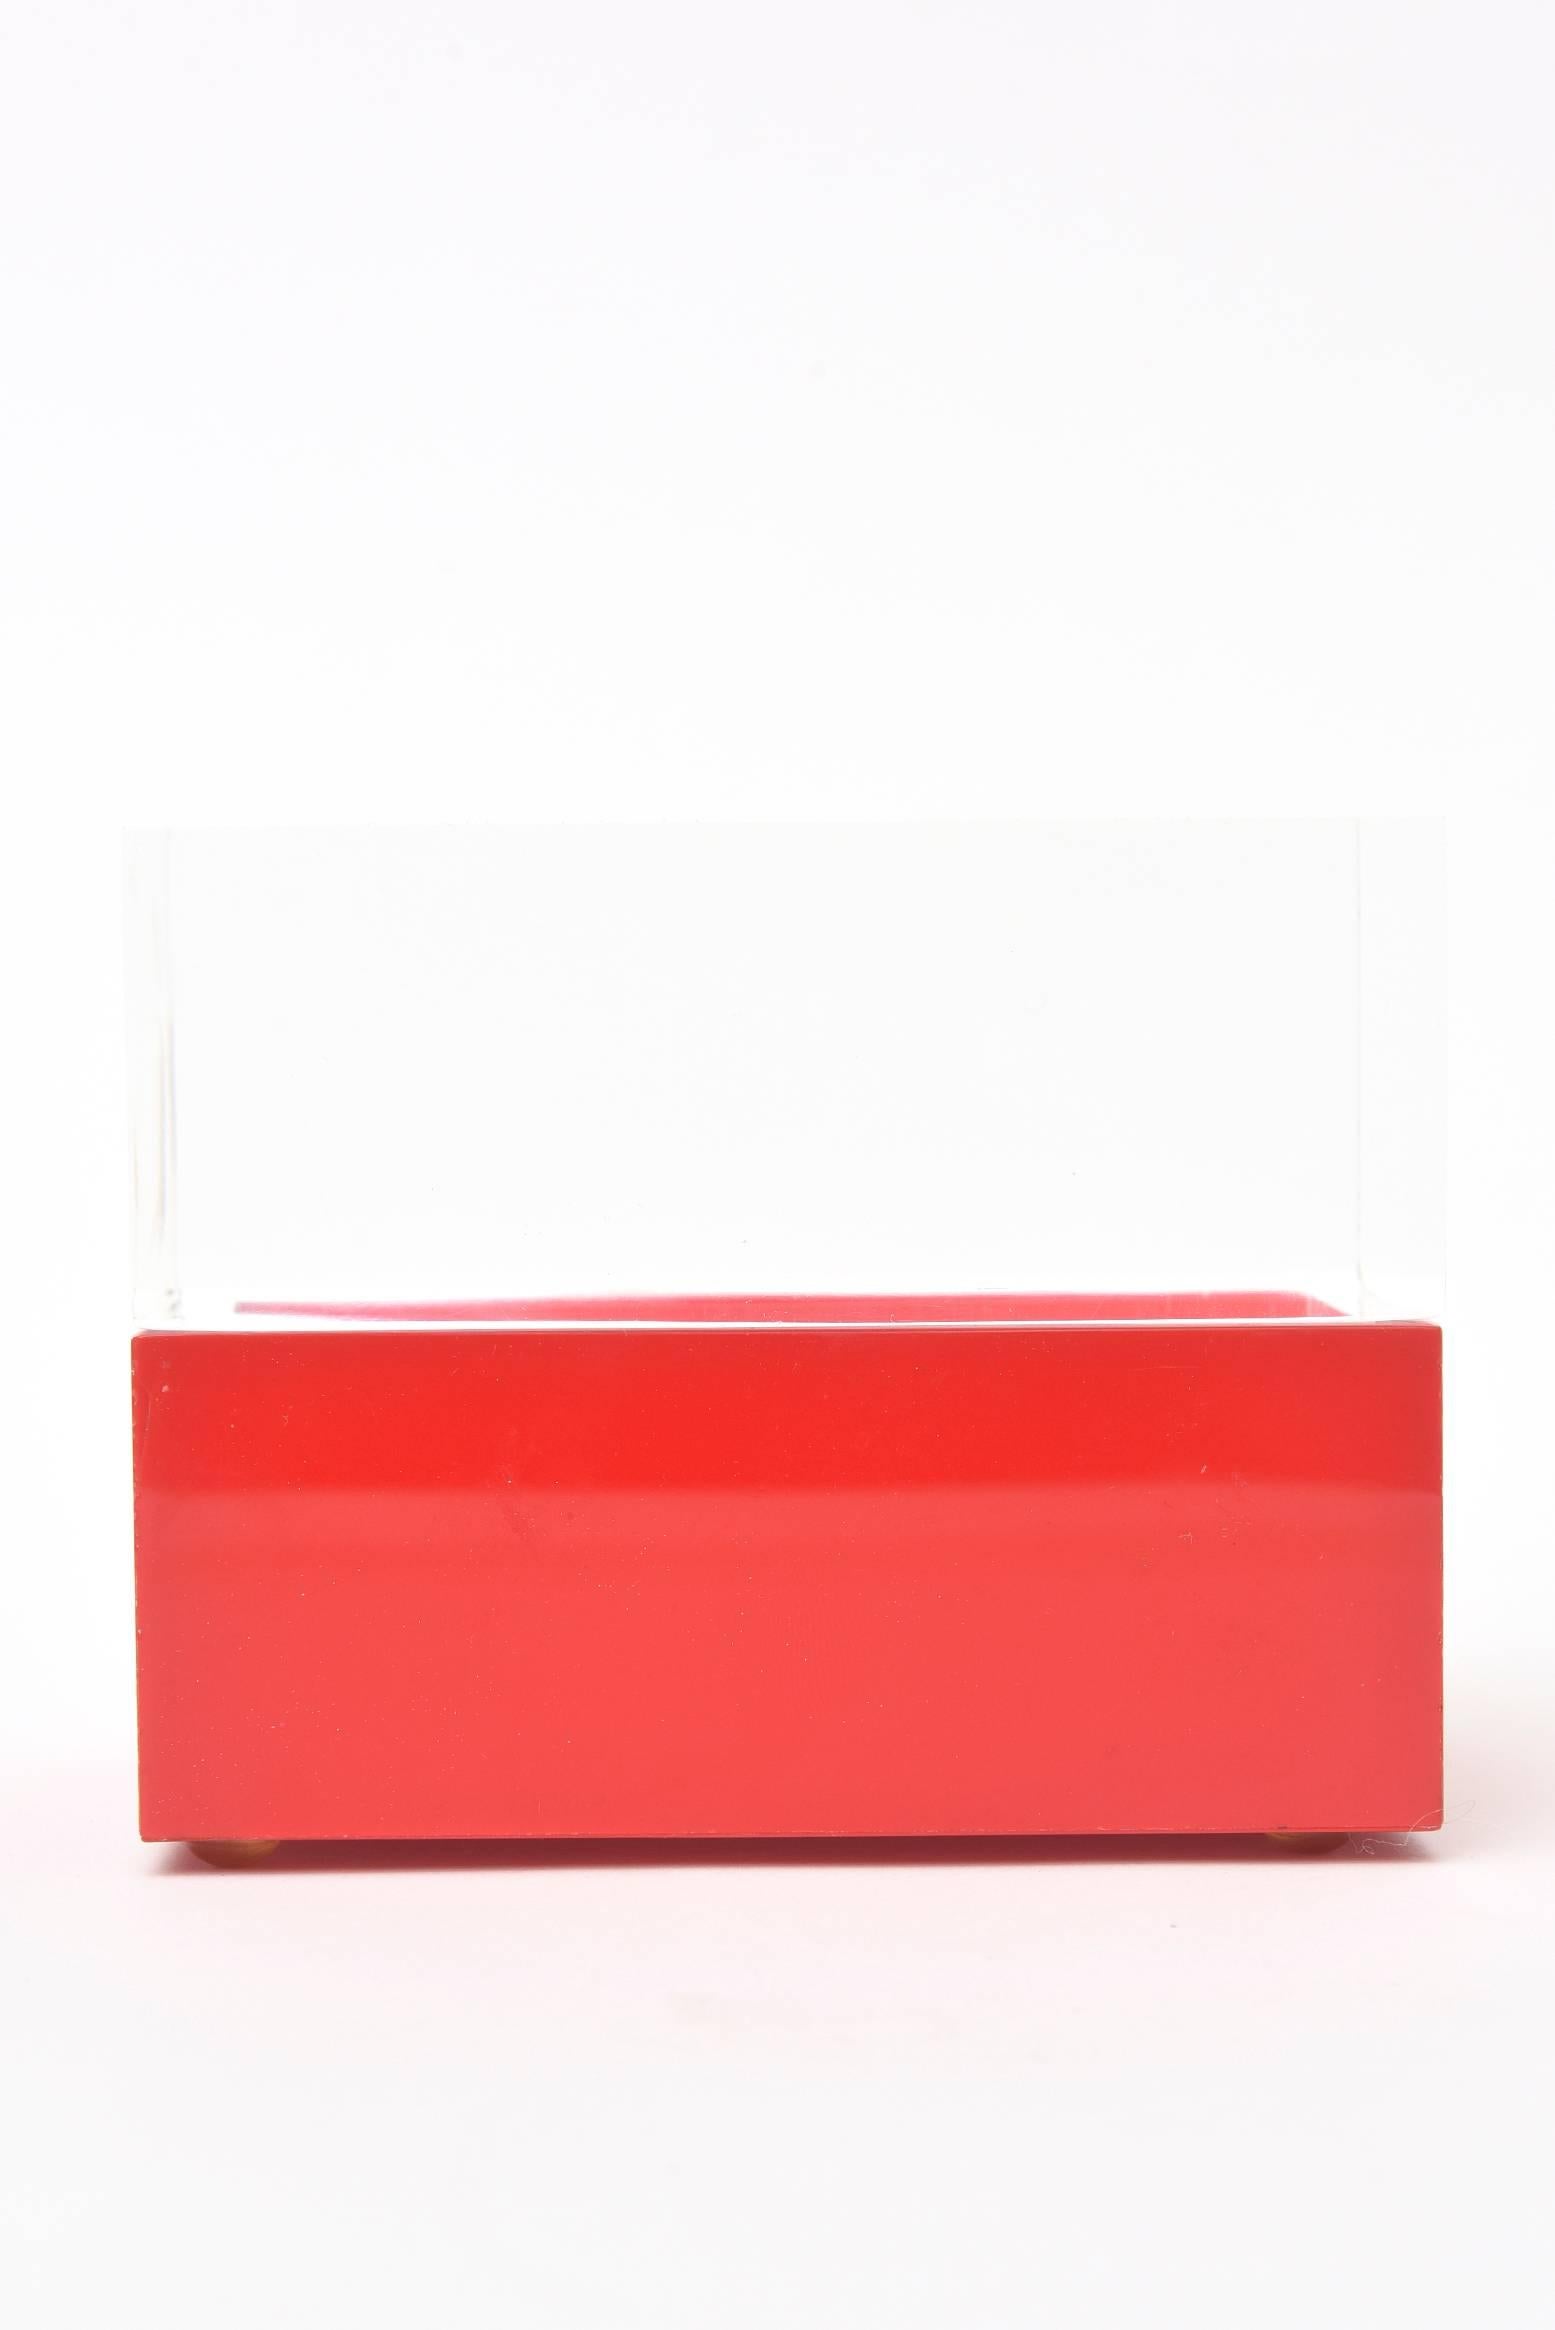 Italian Two-Part Lucite Vintage Box /HOLIDAY SATURDAY SALE 3